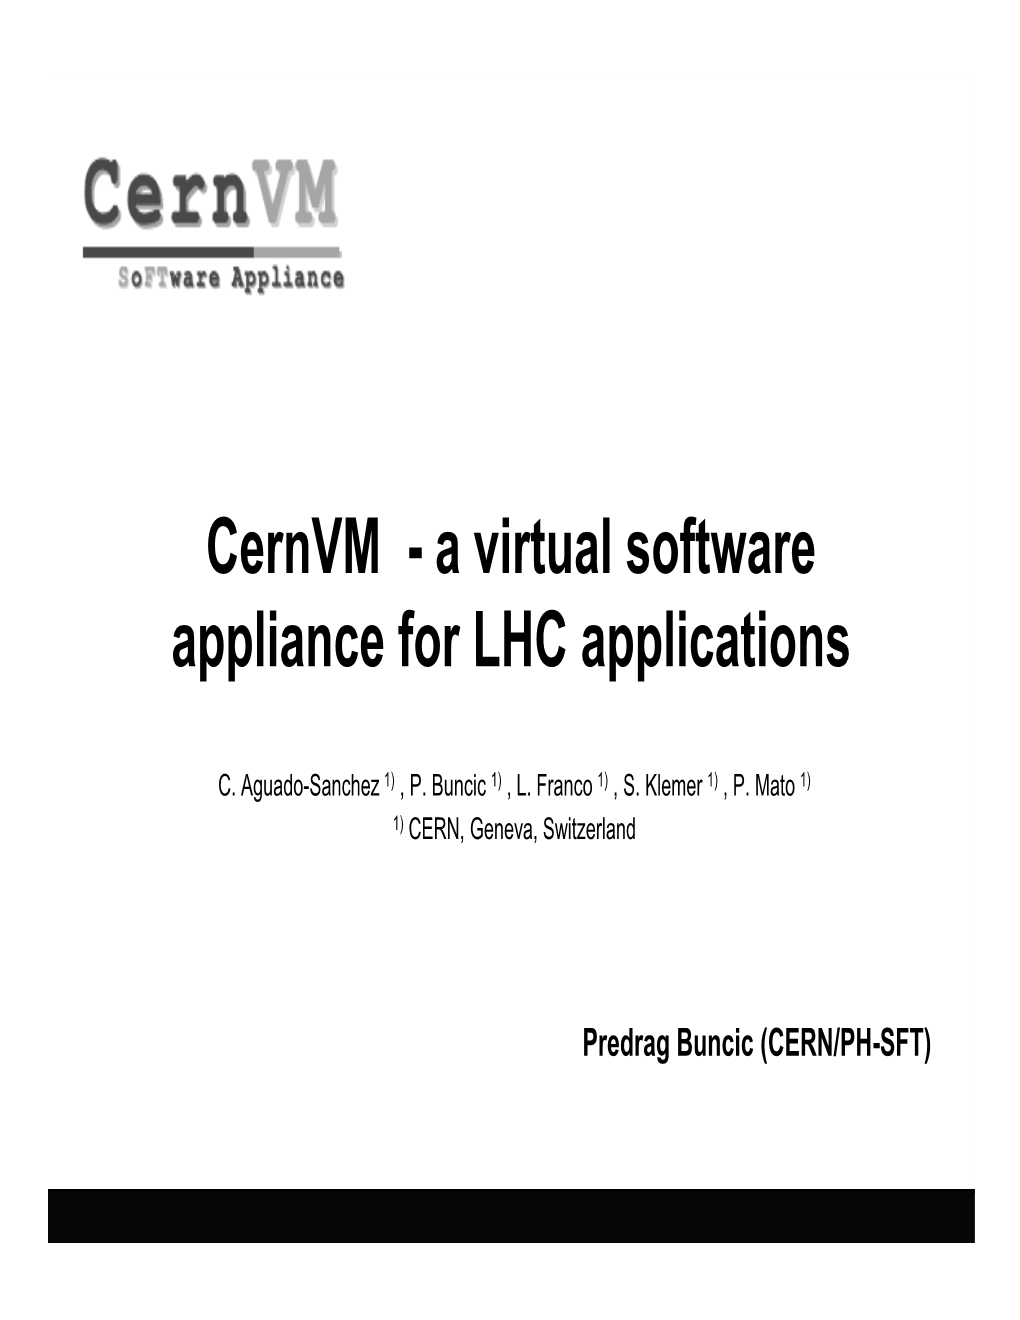 A Virtual Software Appliance for LHC Applications